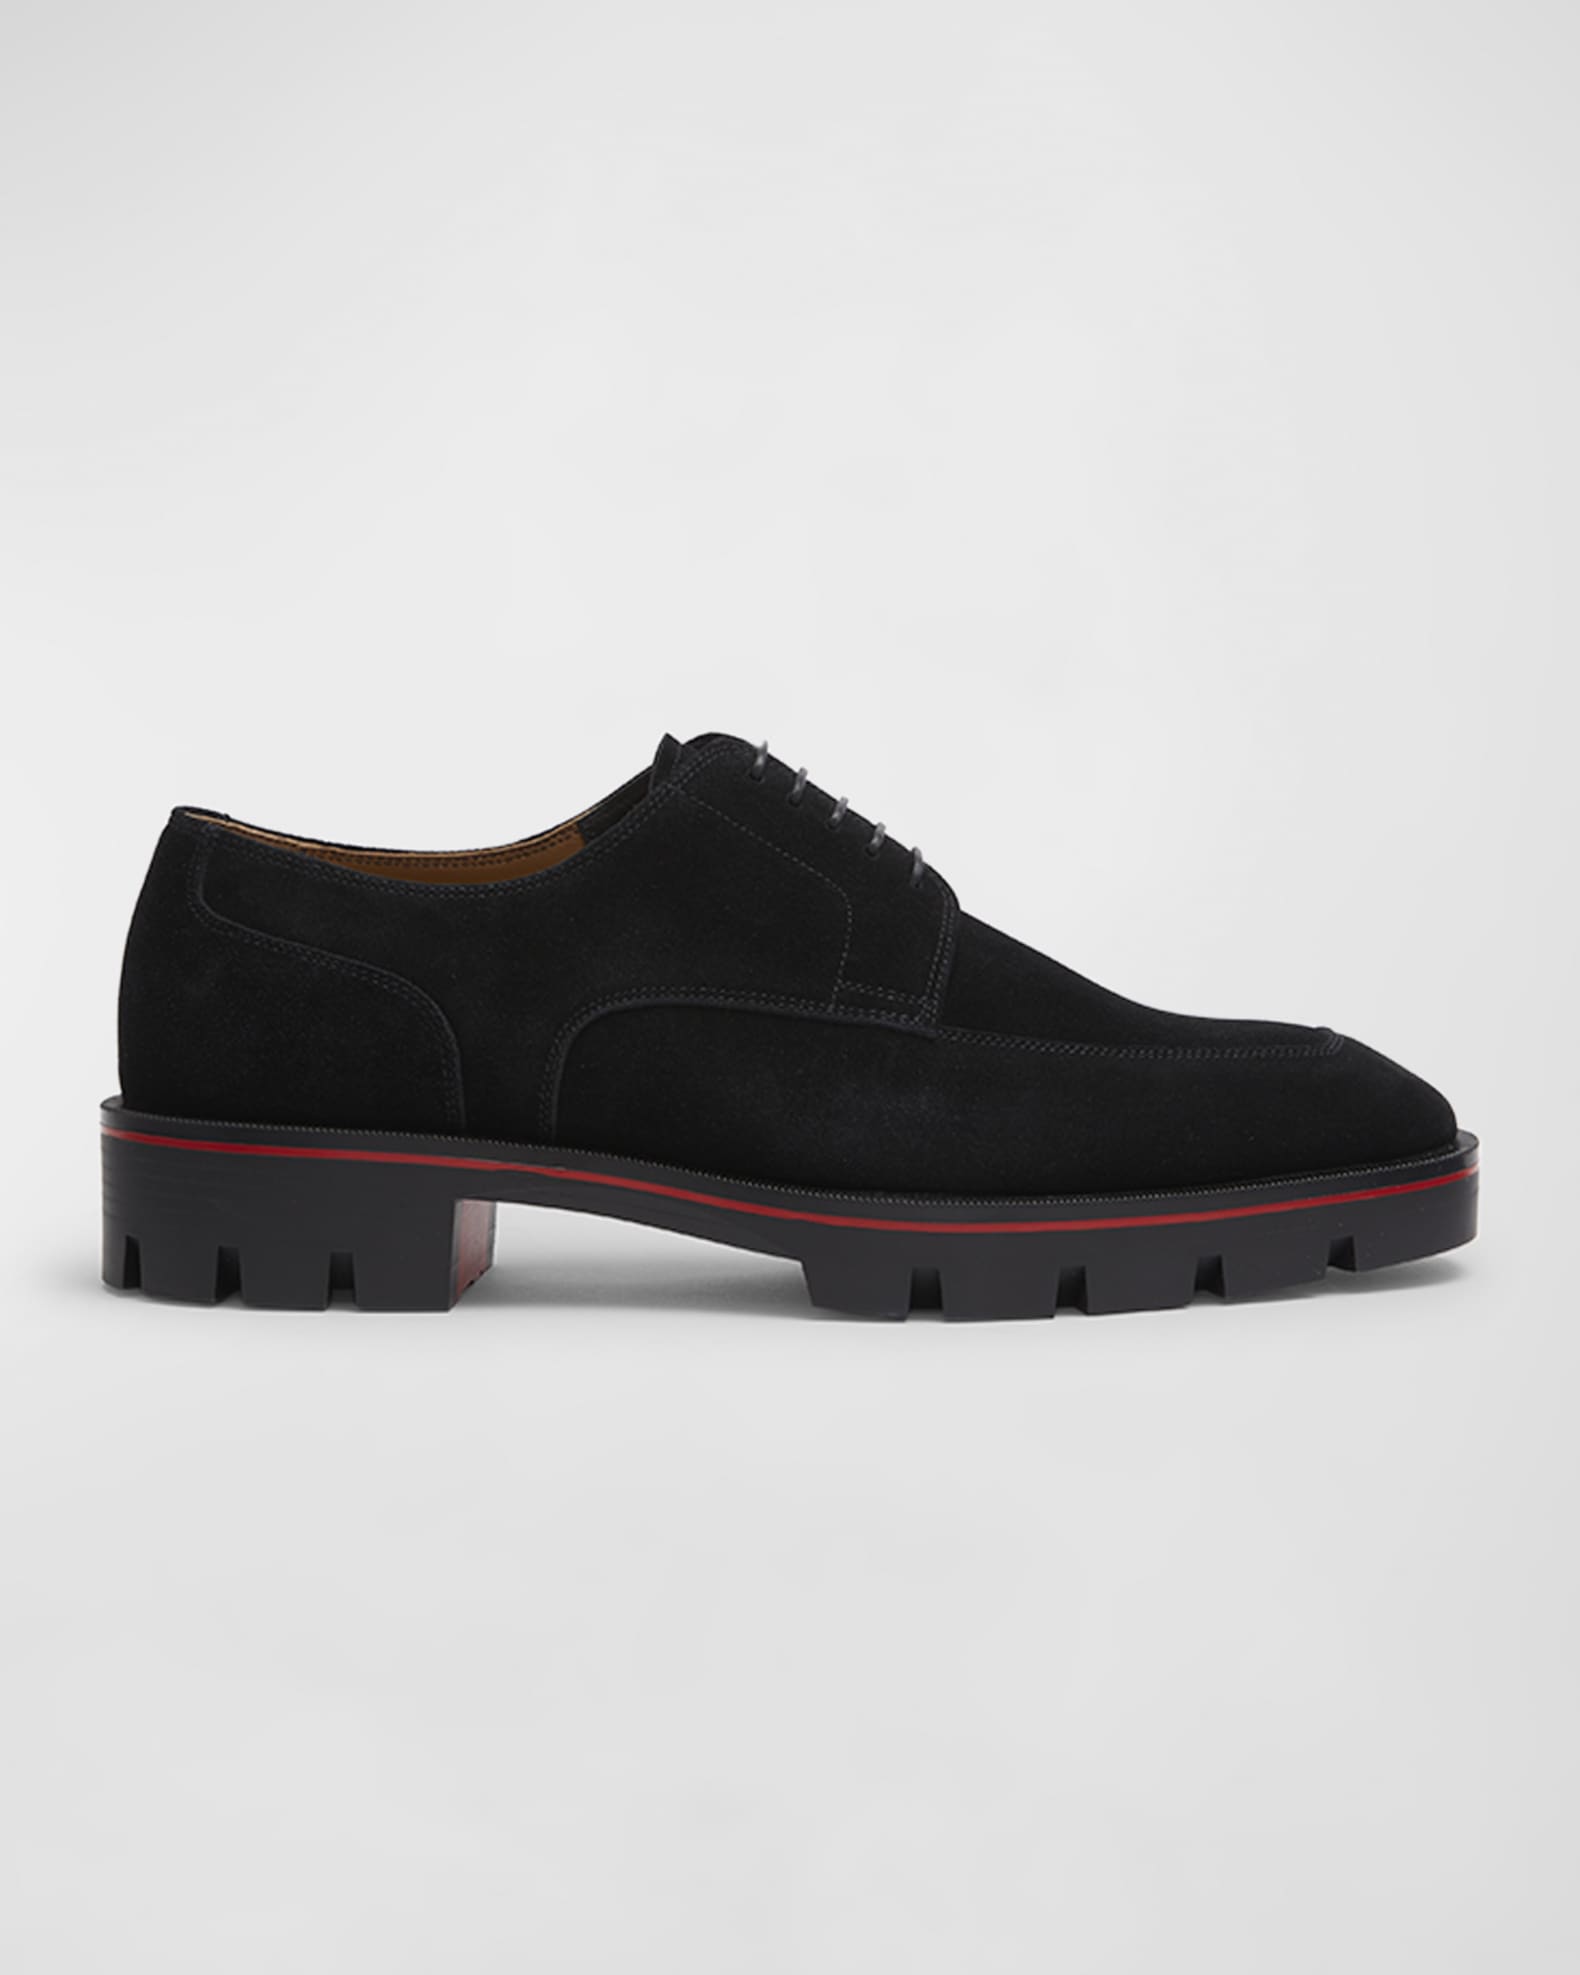 Christian Louboutin Men's Surcity Red-Sole Leather Derby Shoes - Bergdorf  Goodman